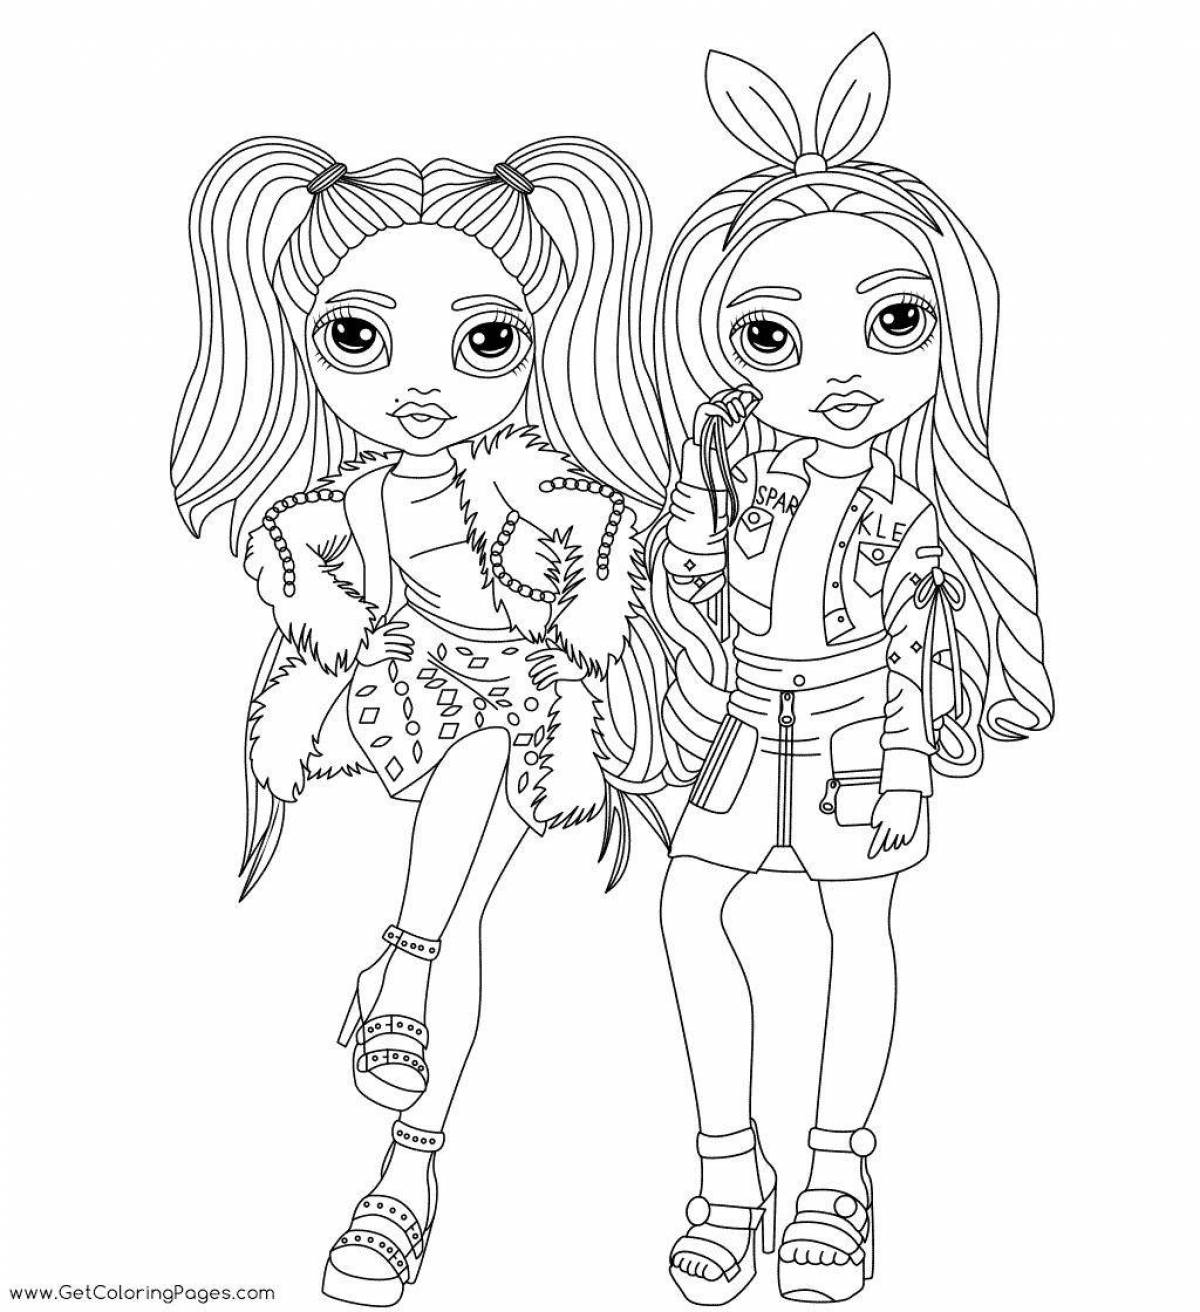 Glamorous rainbow high coloring page